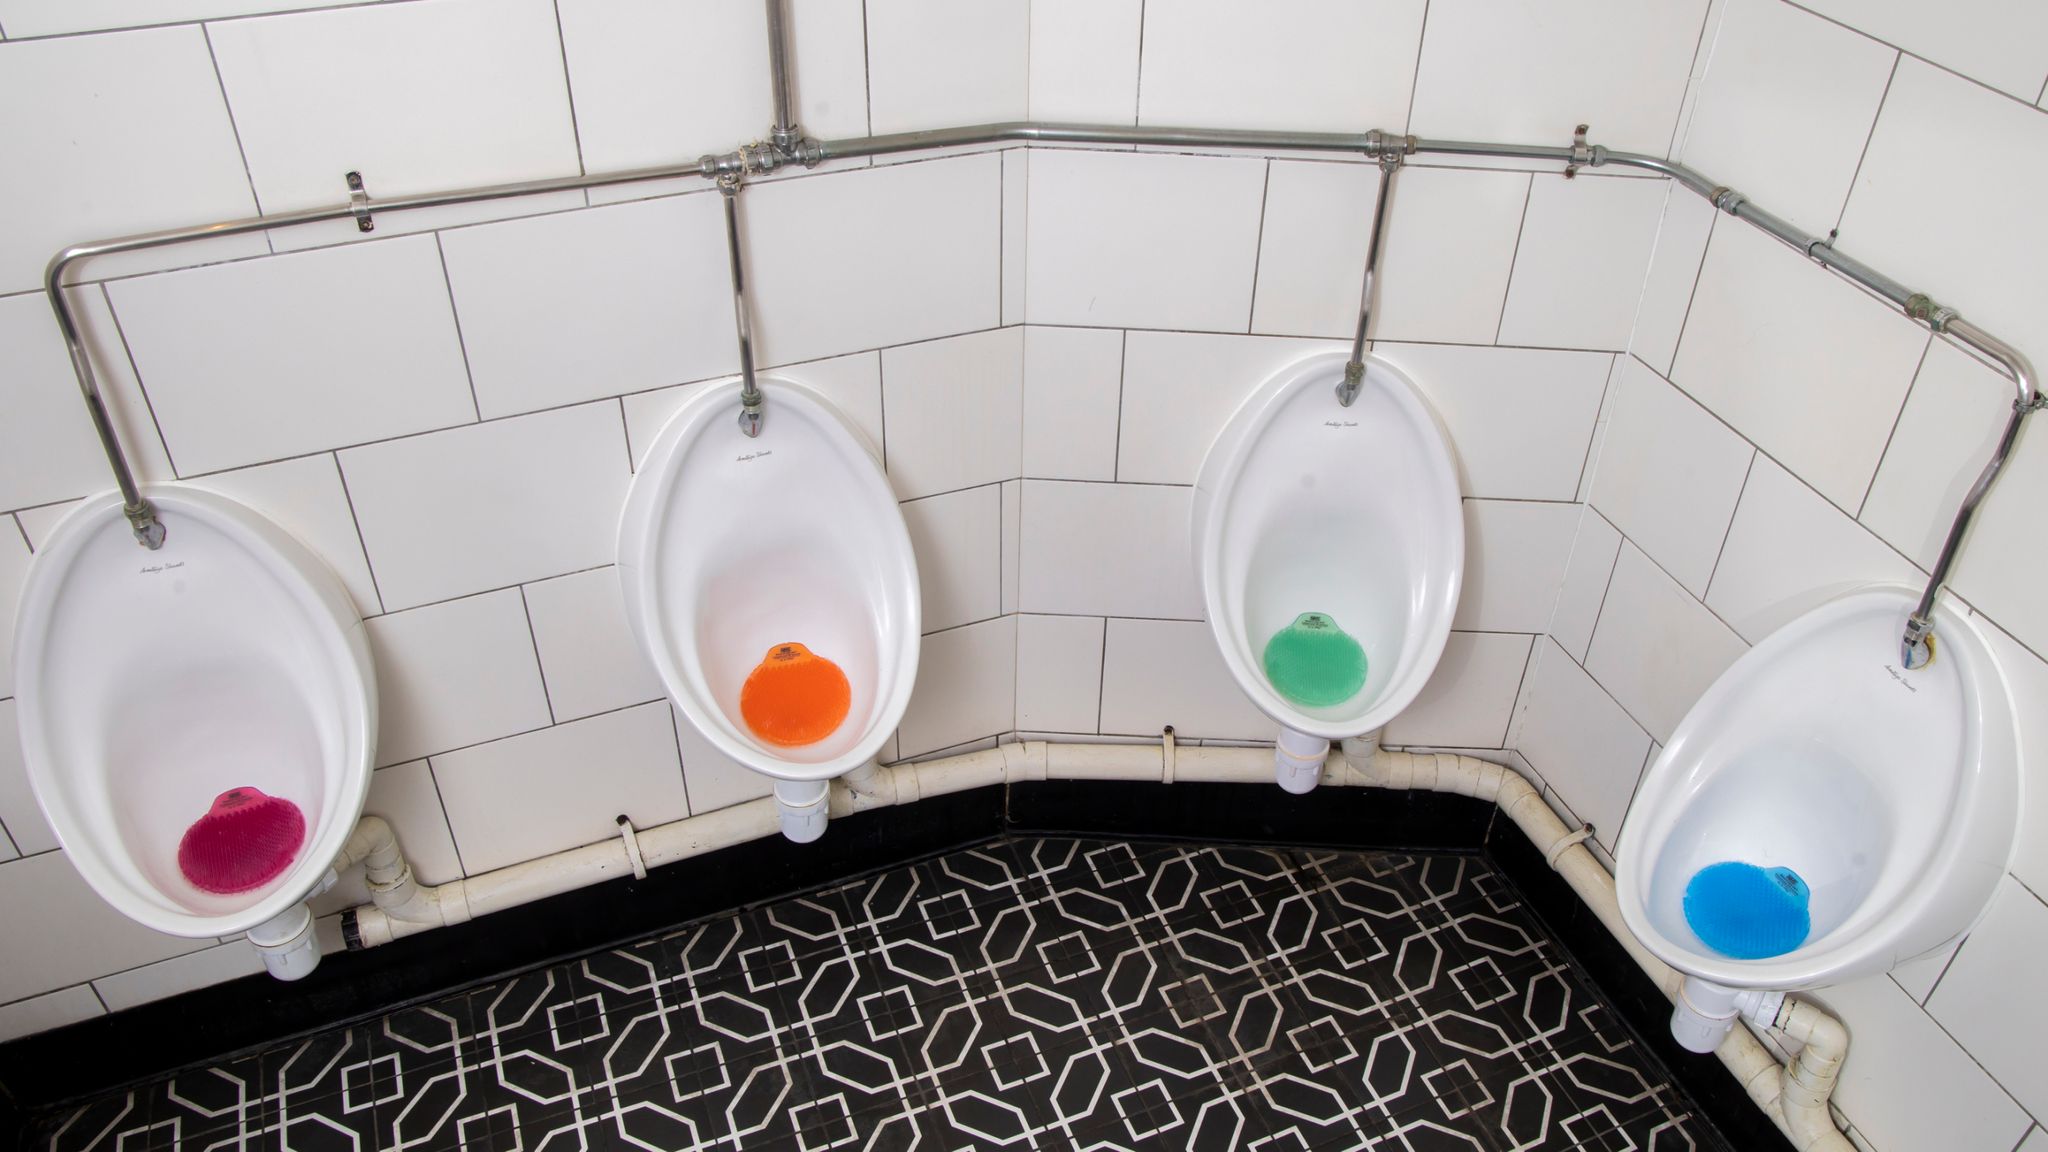 NHS to put warnings about cancer symptoms on urinal mats in pubs